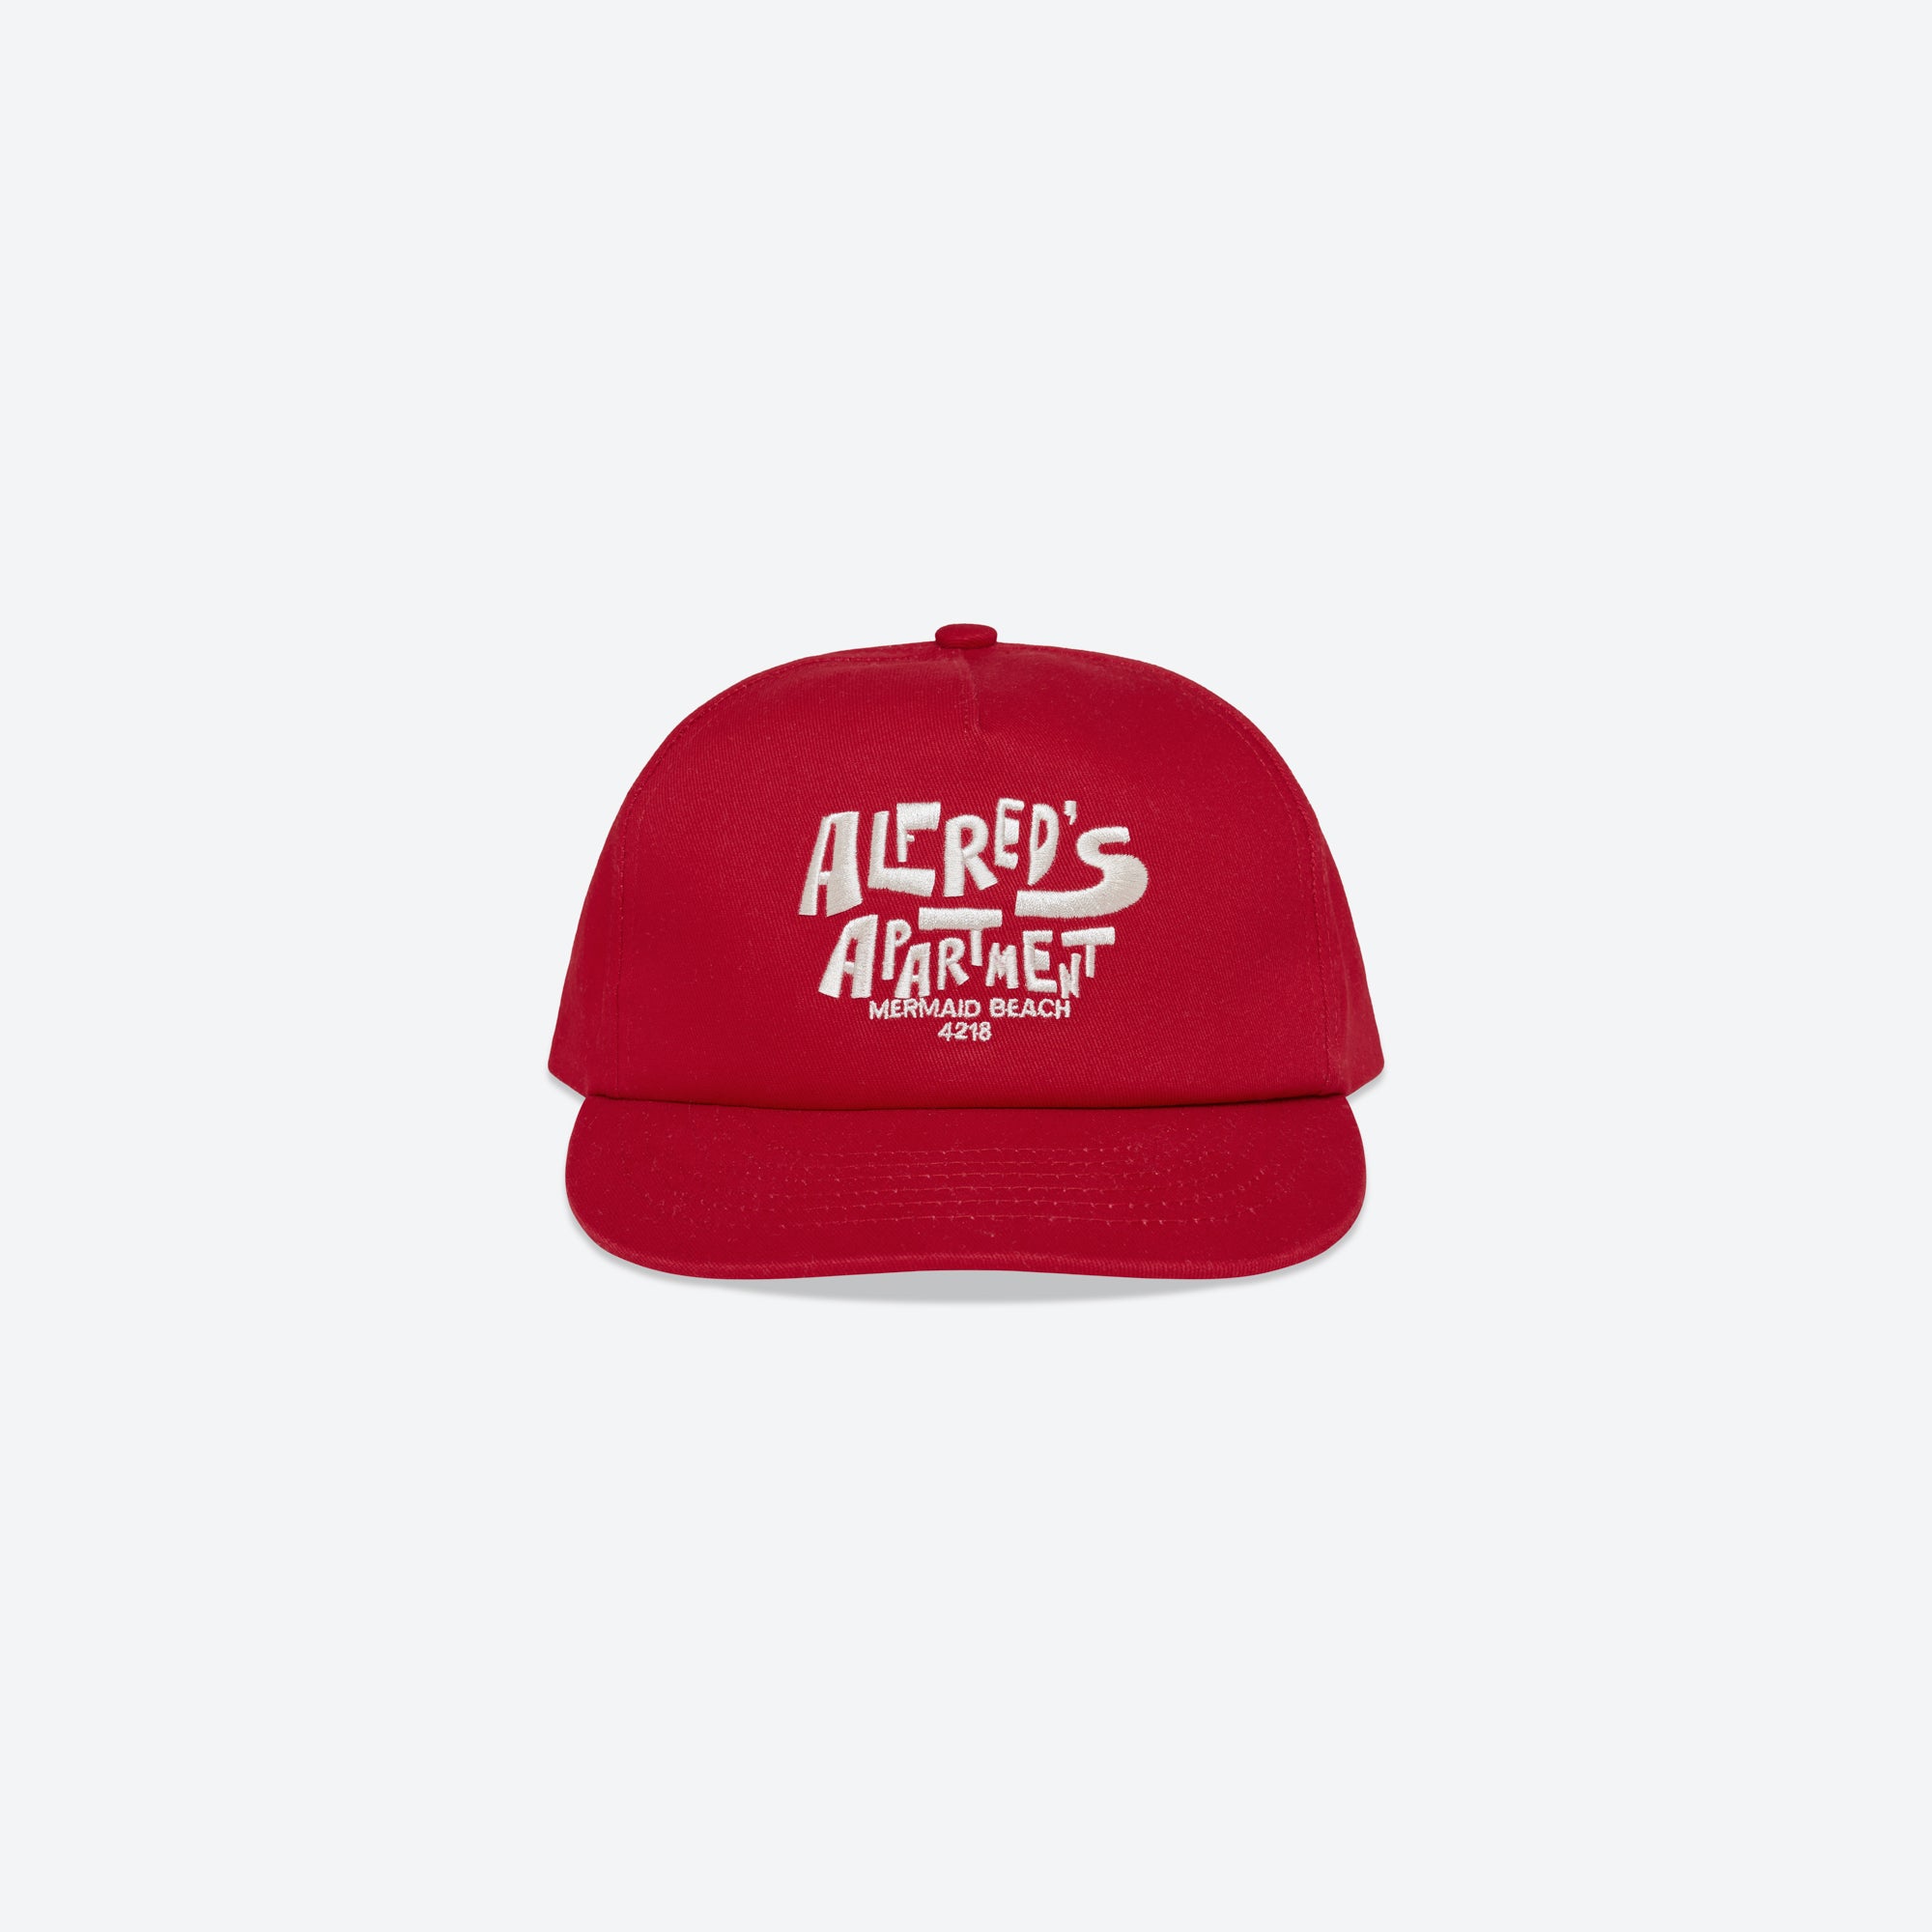 Alfred's Apartment - OG Cap - Red